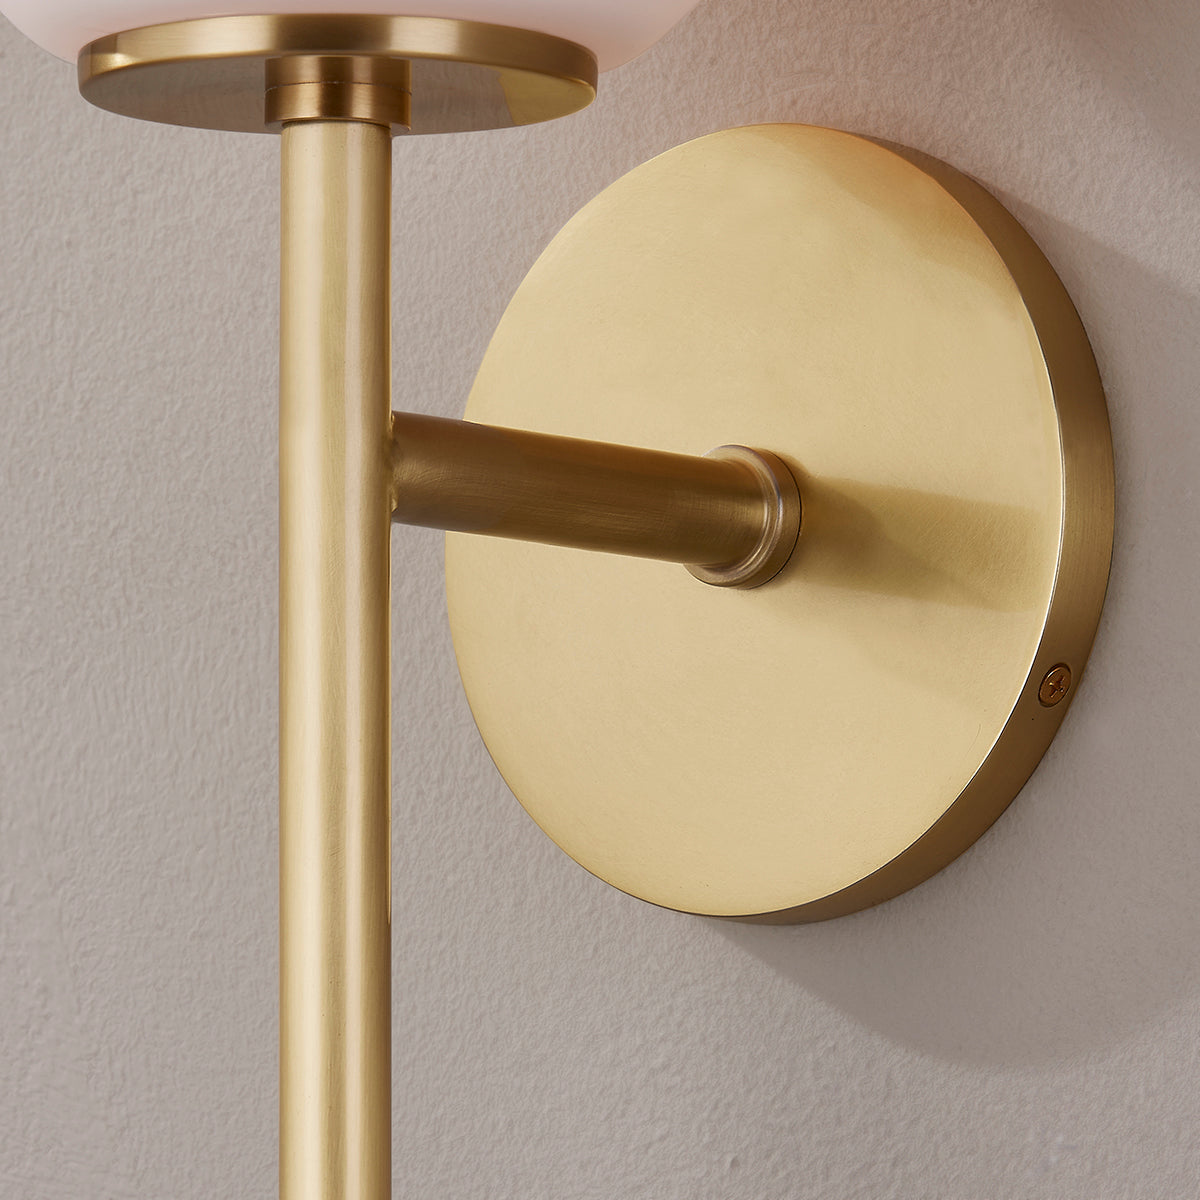 LED Aged Brass Arm with Opal White Glass Shade Wall Sconce